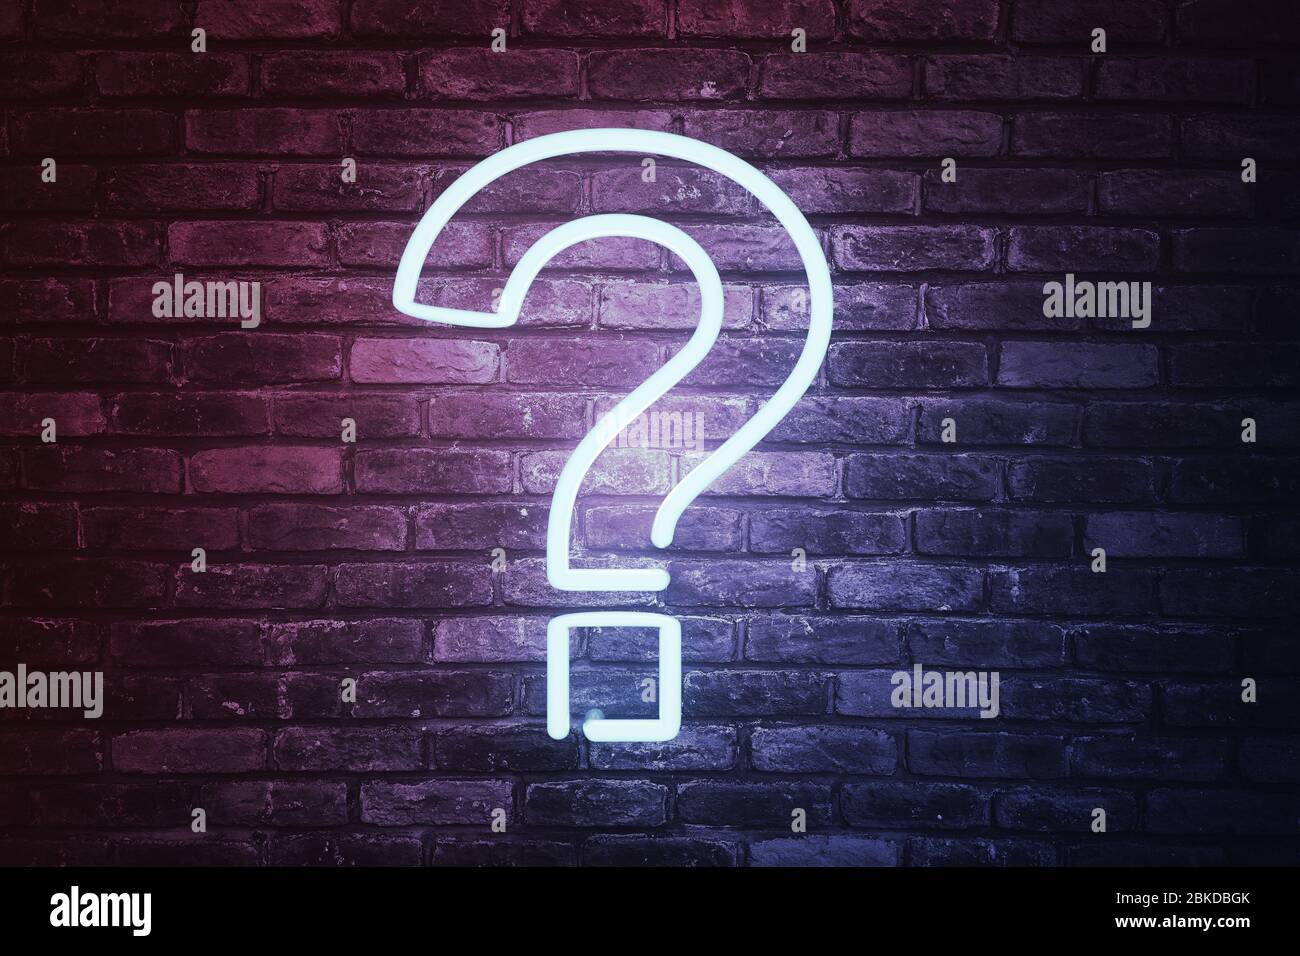 3D illustrated question mark with led light on brick wall background Stock Photo